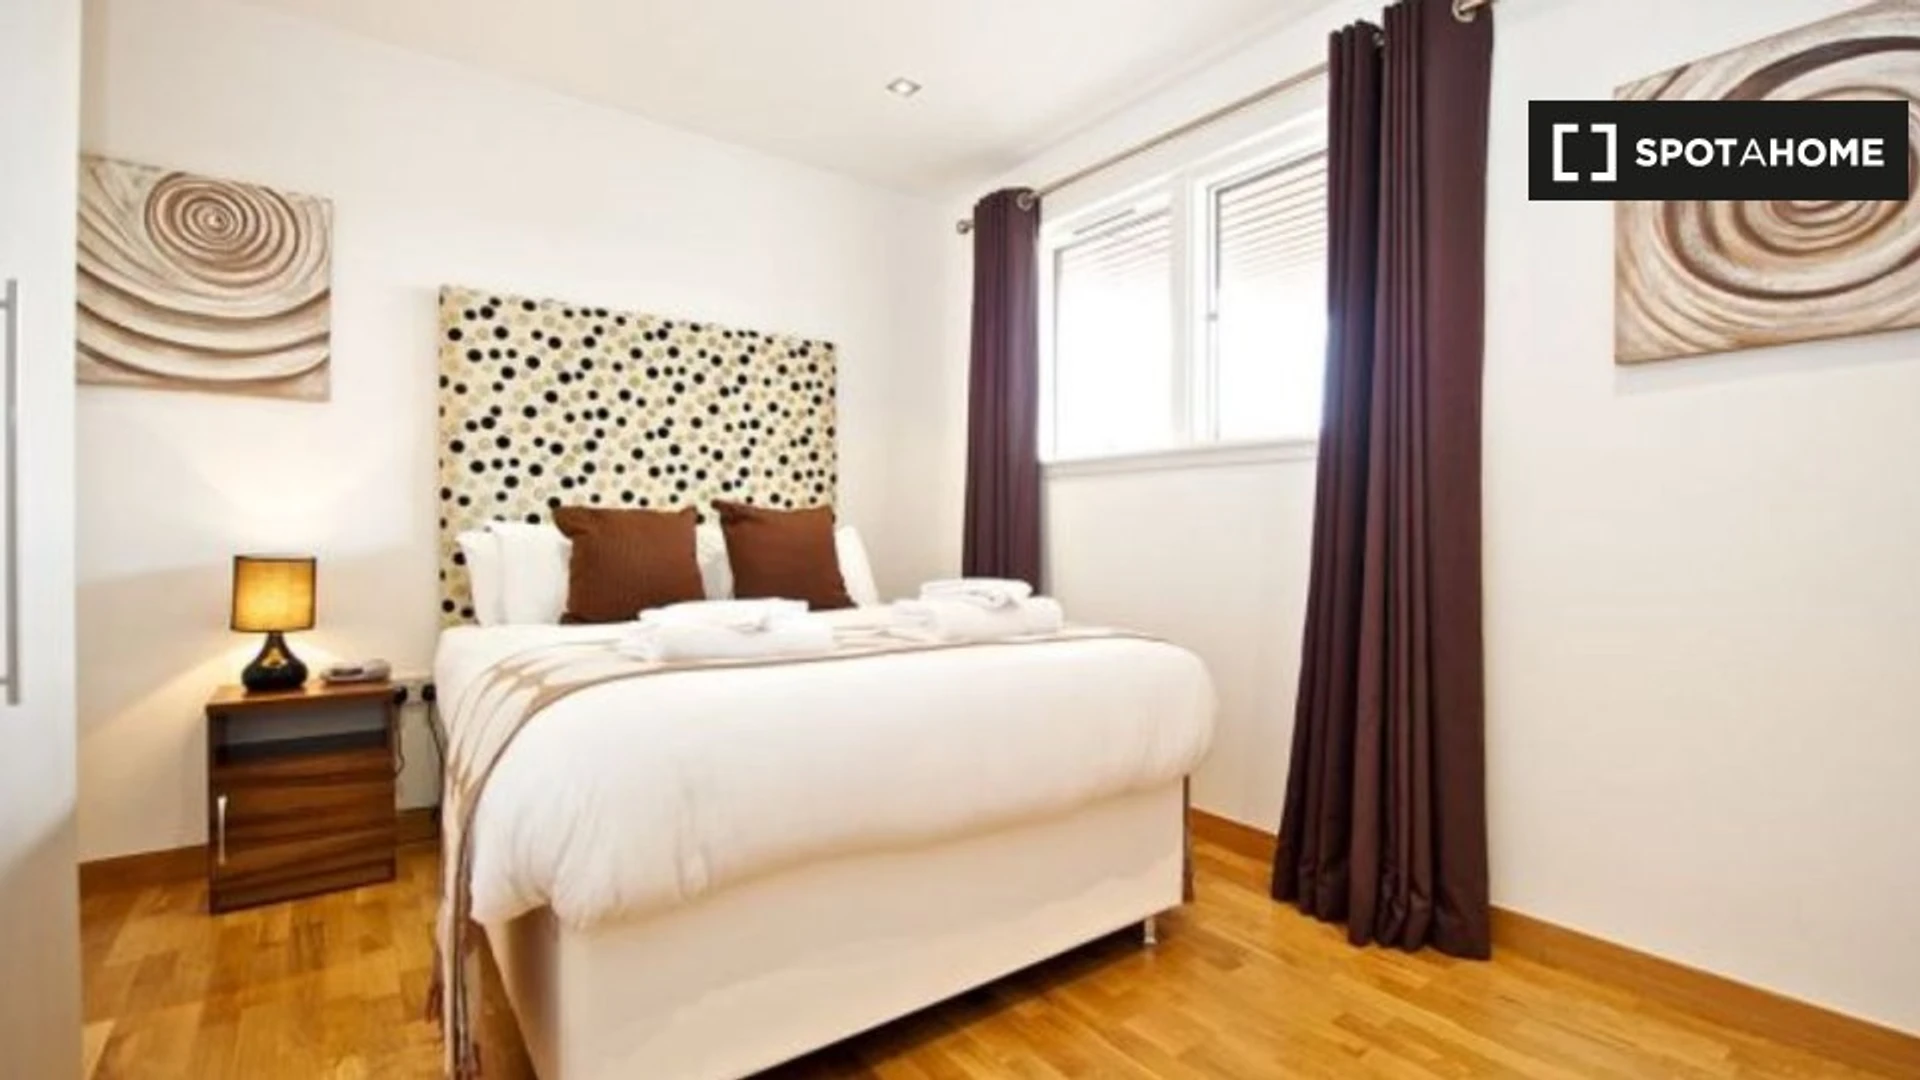 Accommodation in the centre of Edinburgh